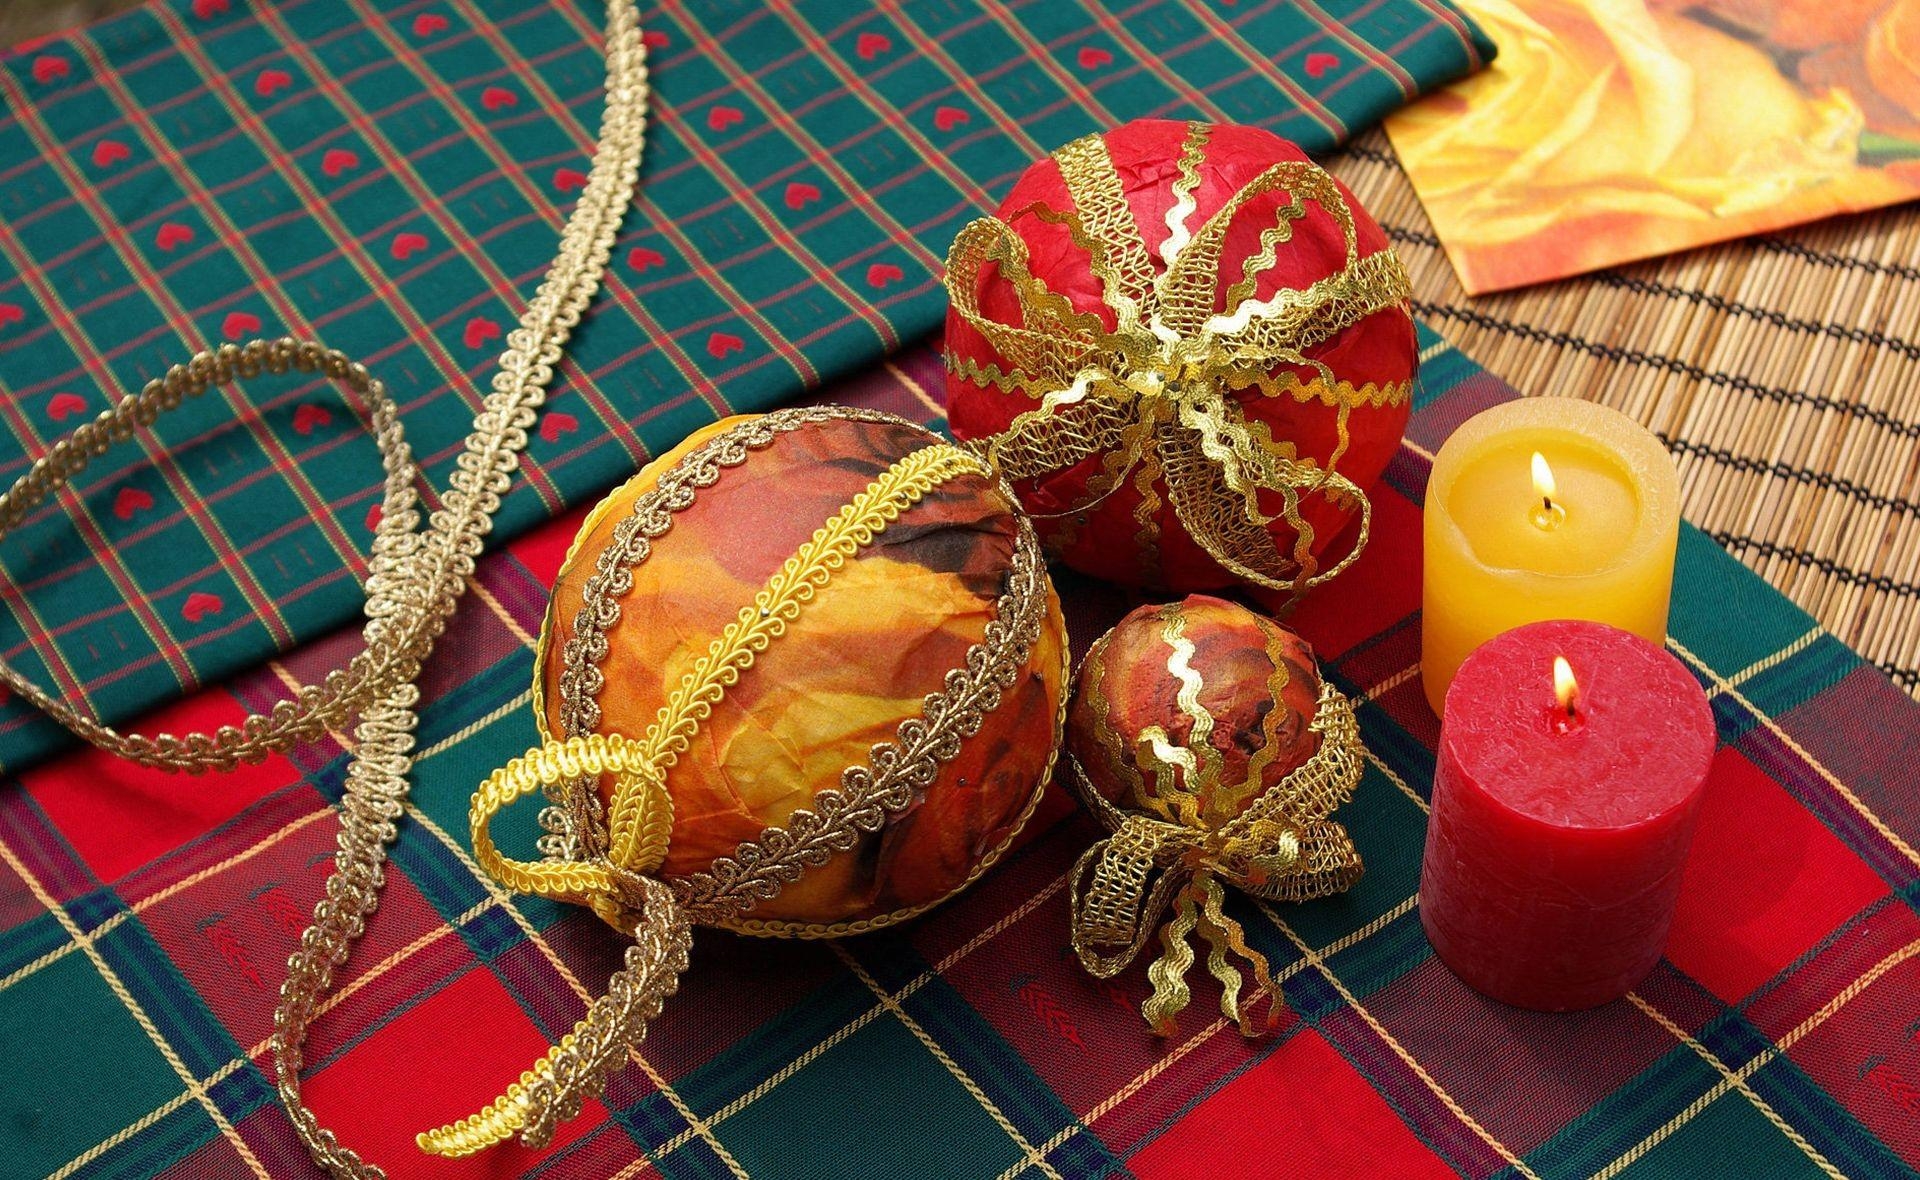 holidays, candles, holiday, tape, christmas decorations, christmas tree toys, tablecloth, braid, preparation